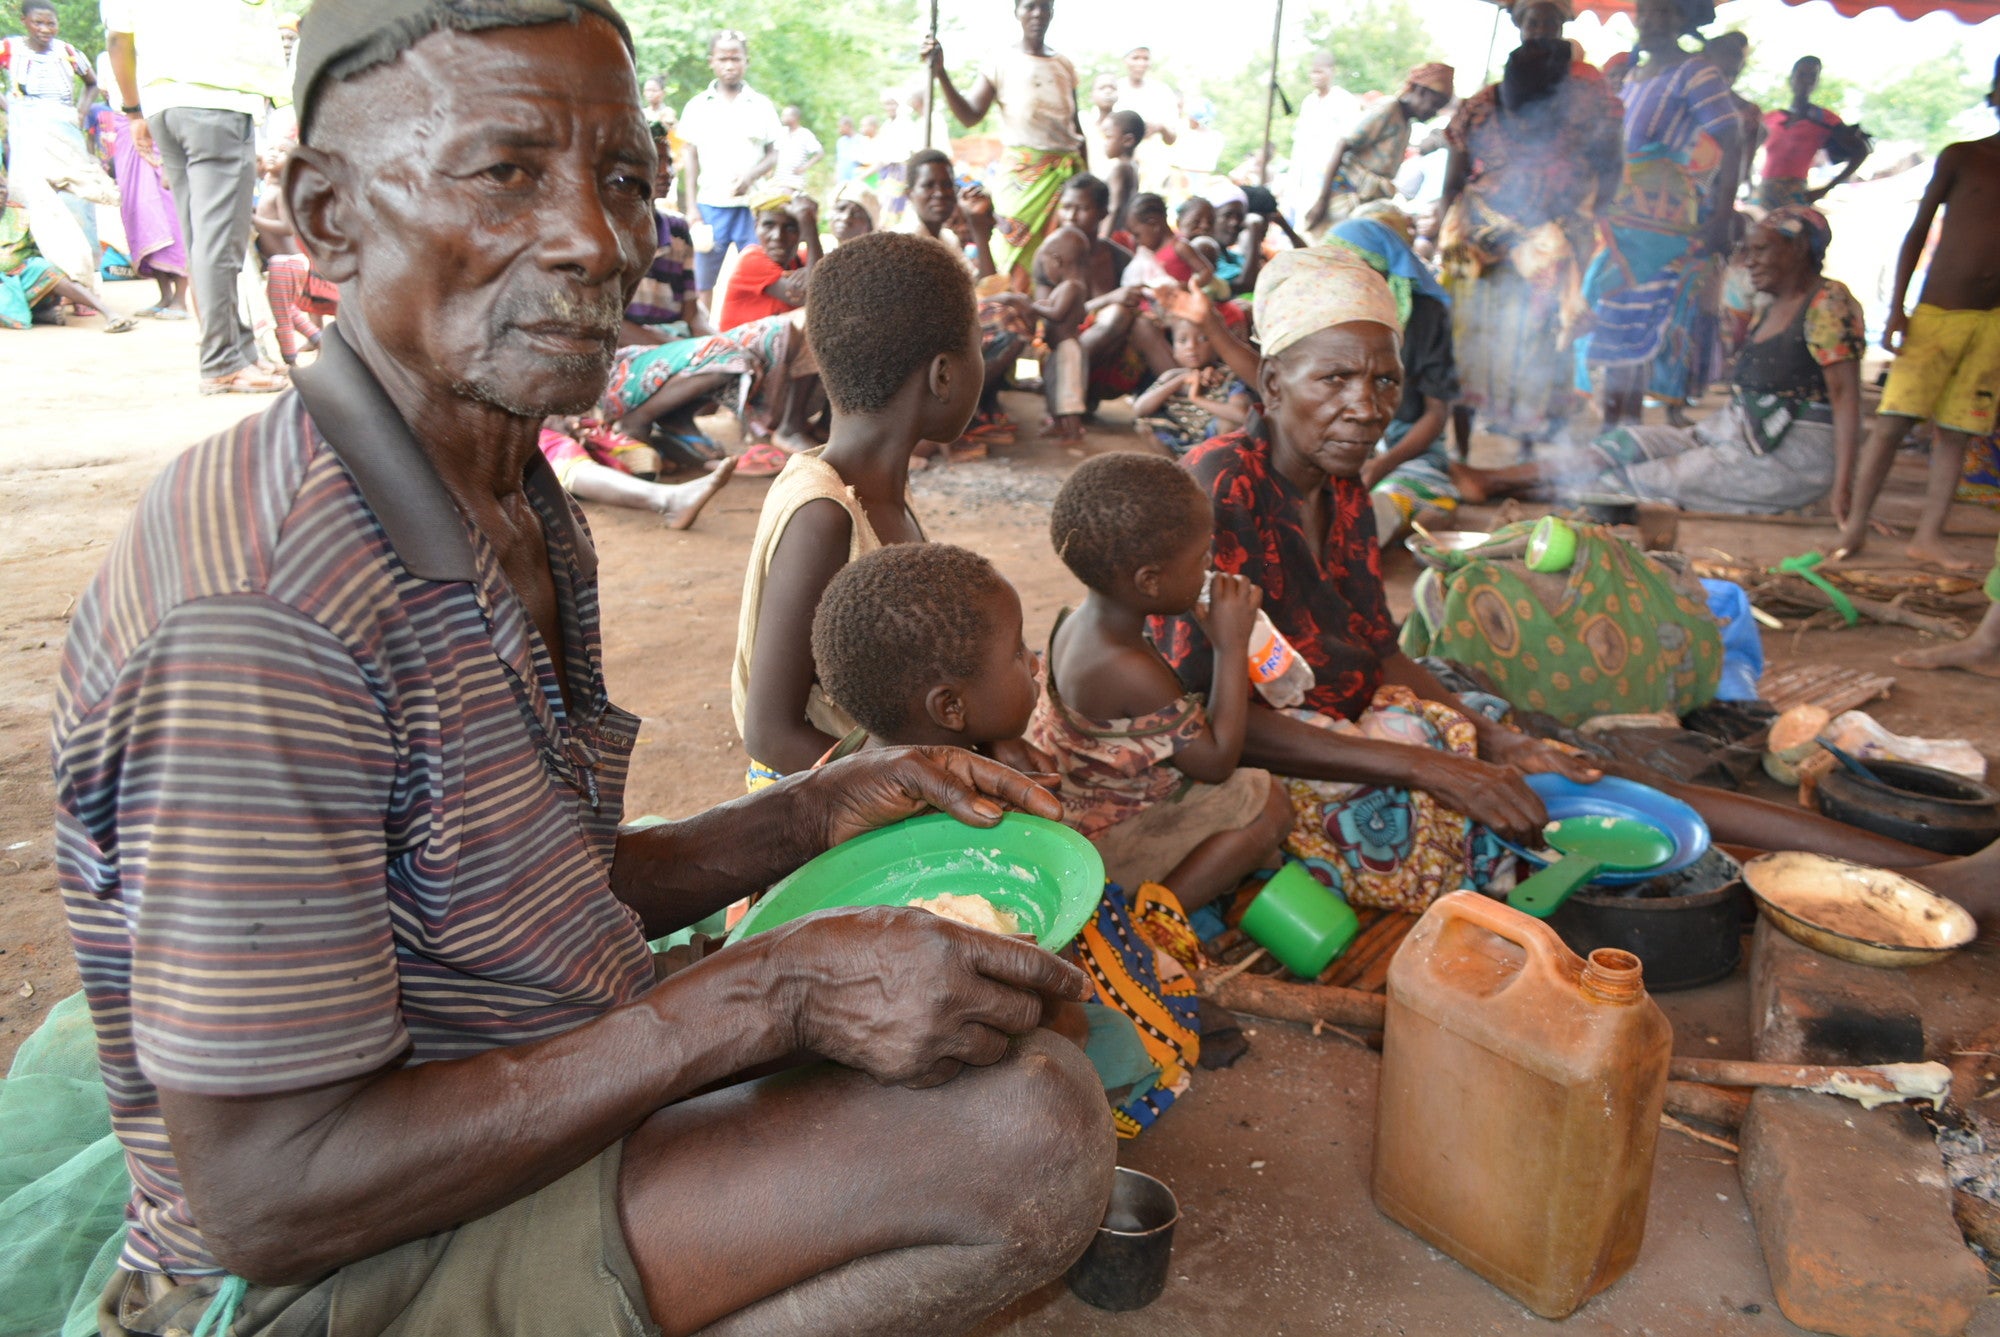 Flooding caused by Cyclone Idai forced Dimingu Nyoka to flee his village with his wife and three grandchildren.